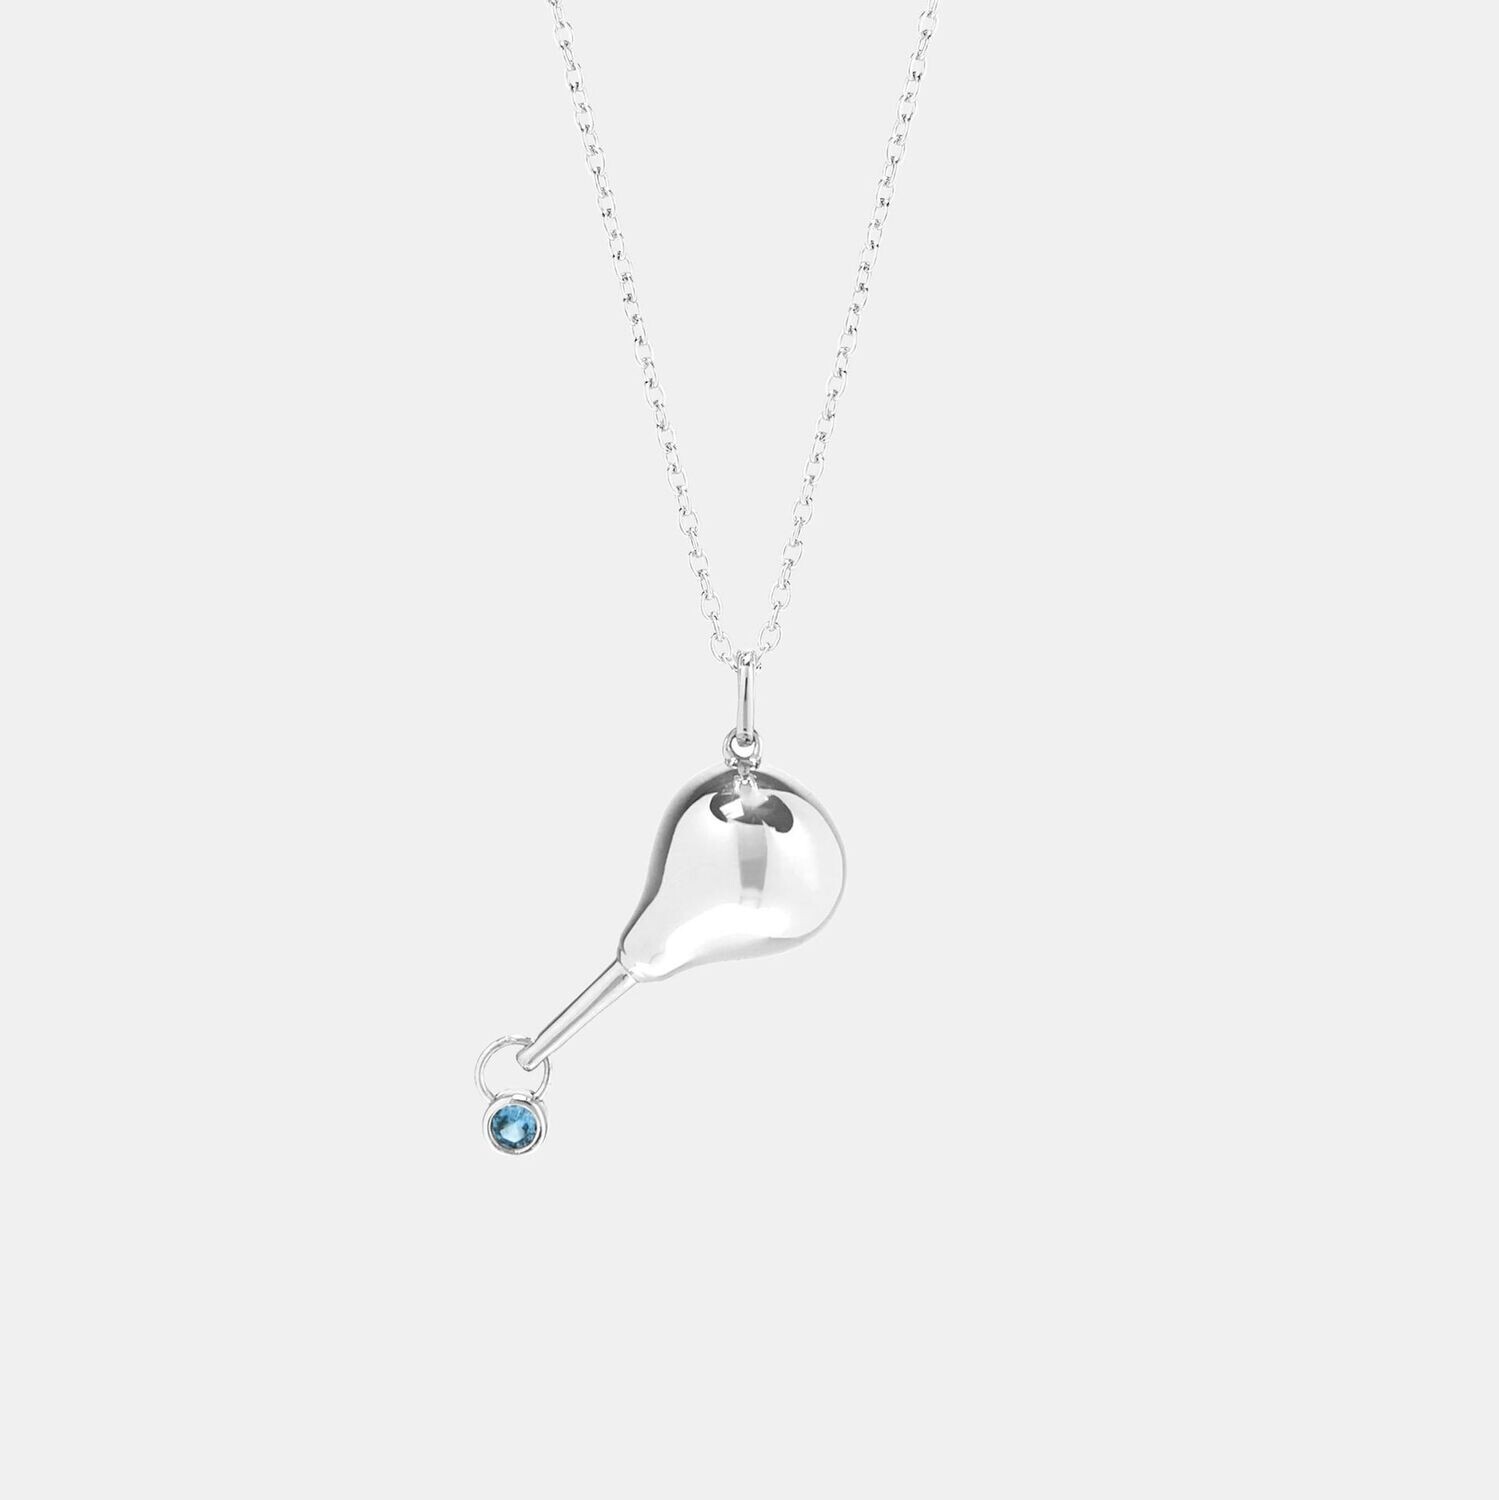 Hoemo World - Dripping Douche Pendant Necklace - Silver